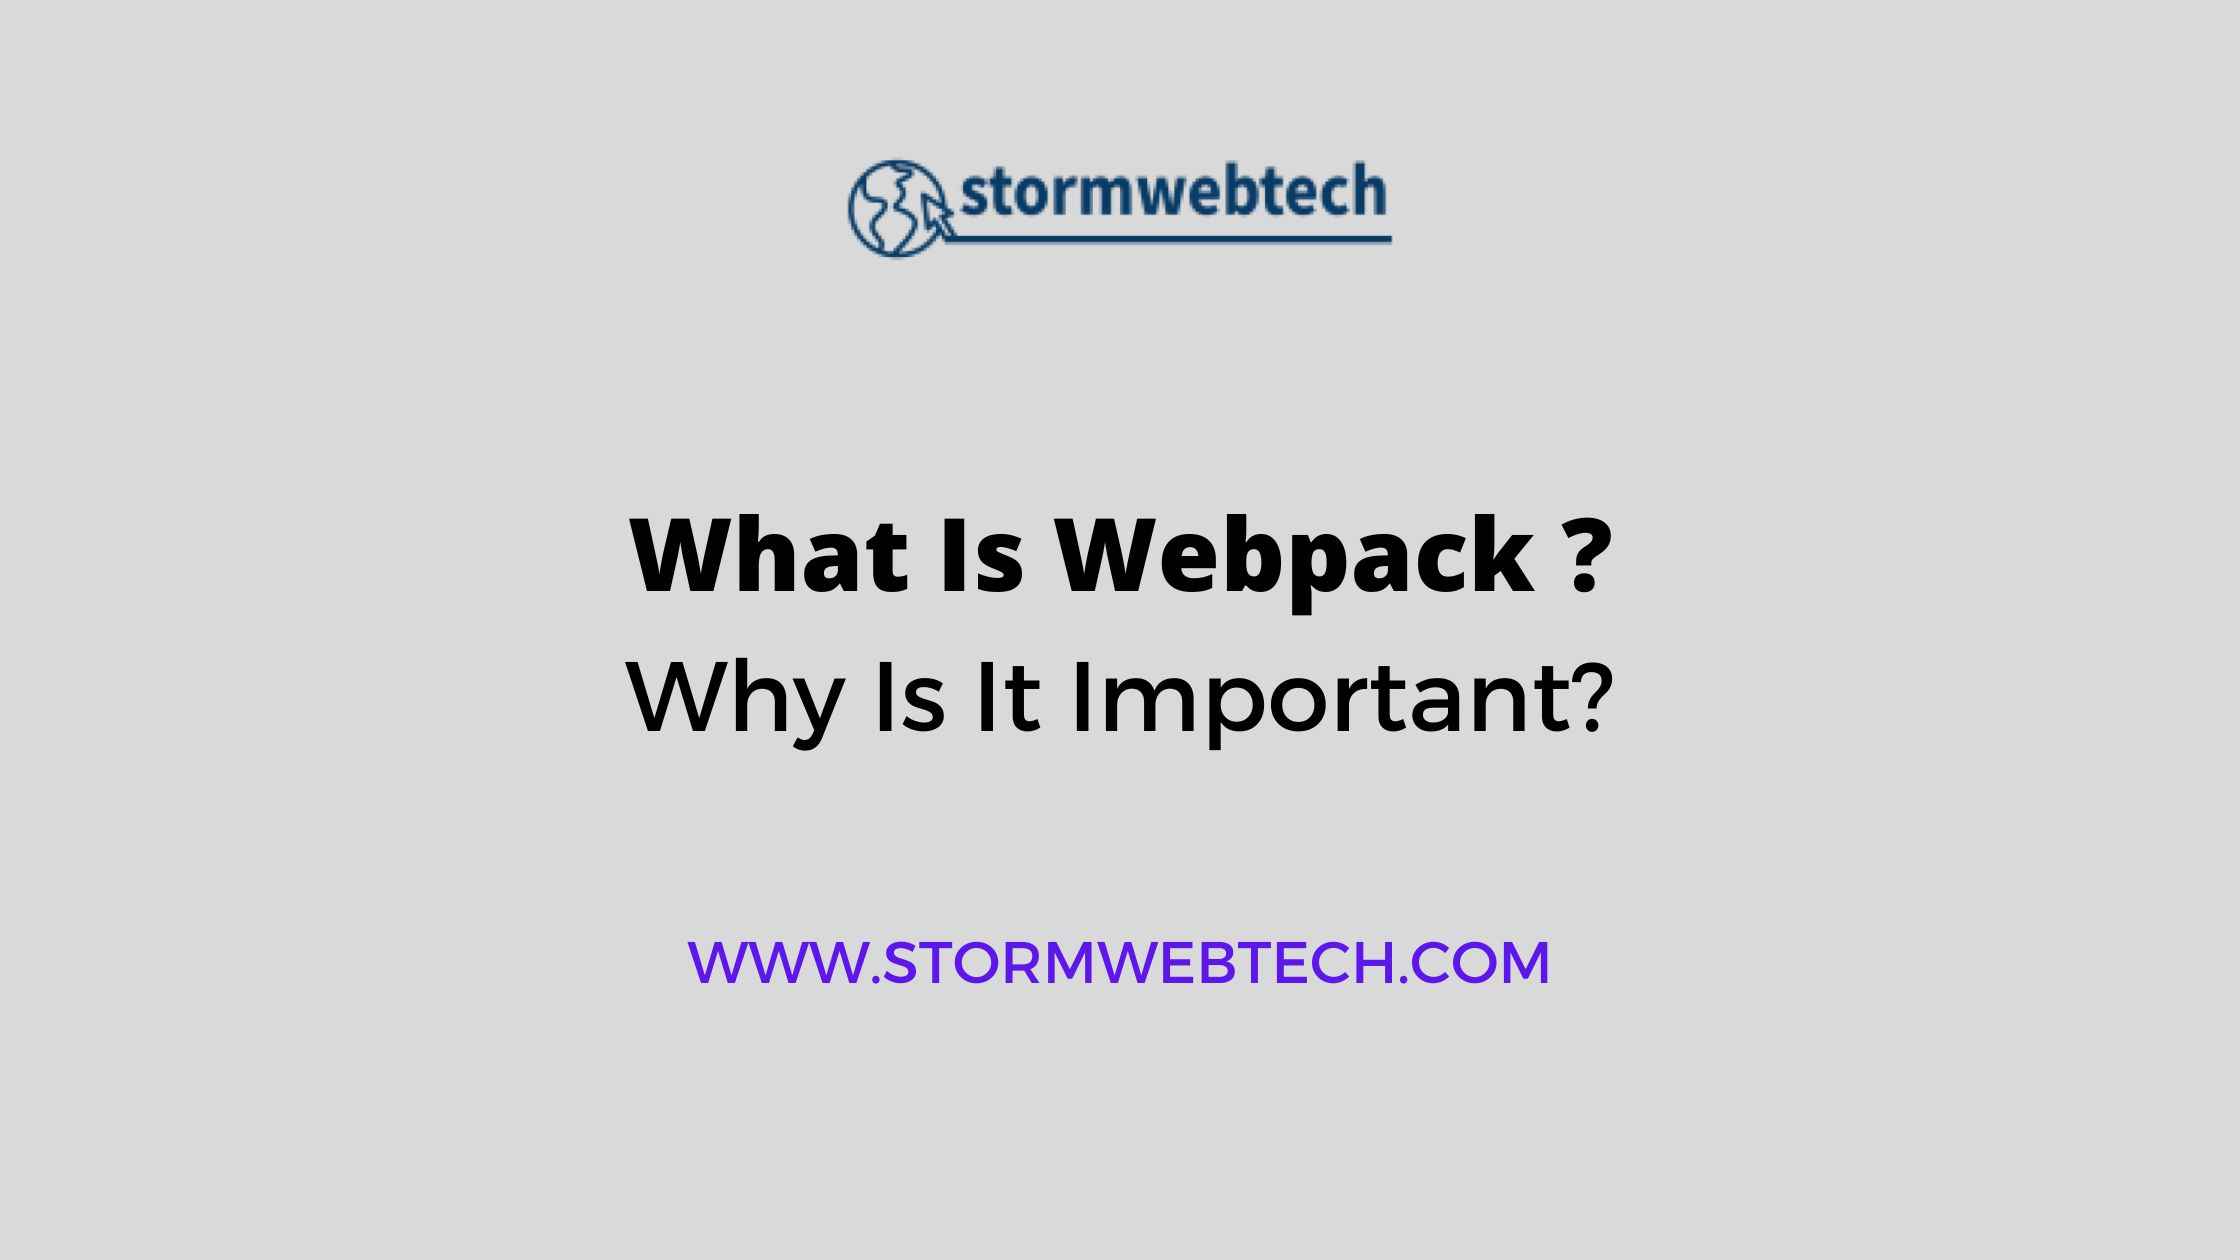 what is webpack, it is a powerful module bundler that allows developers to transform and bundle their web assets into a single optimized package